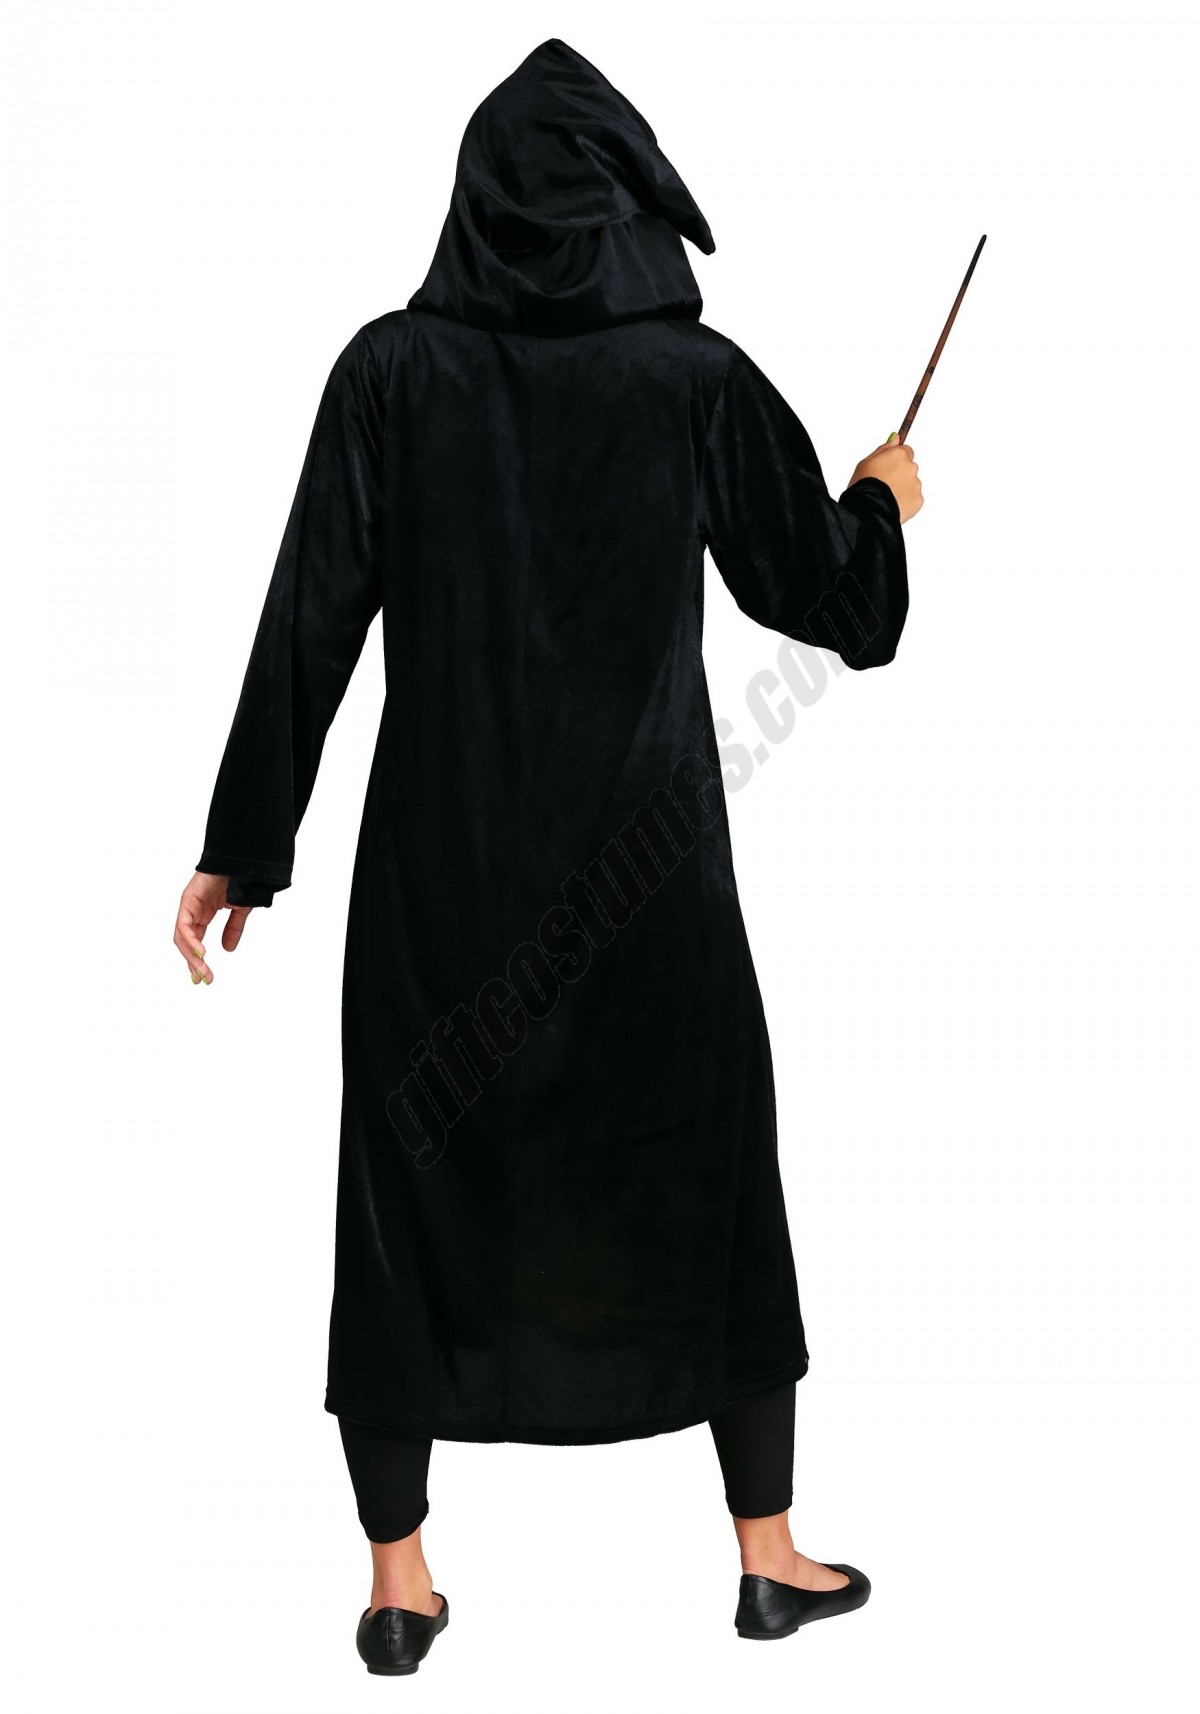 Deluxe Harry Potter Adult Plus Size Hufflepuff Robe Costume Promotions - -4